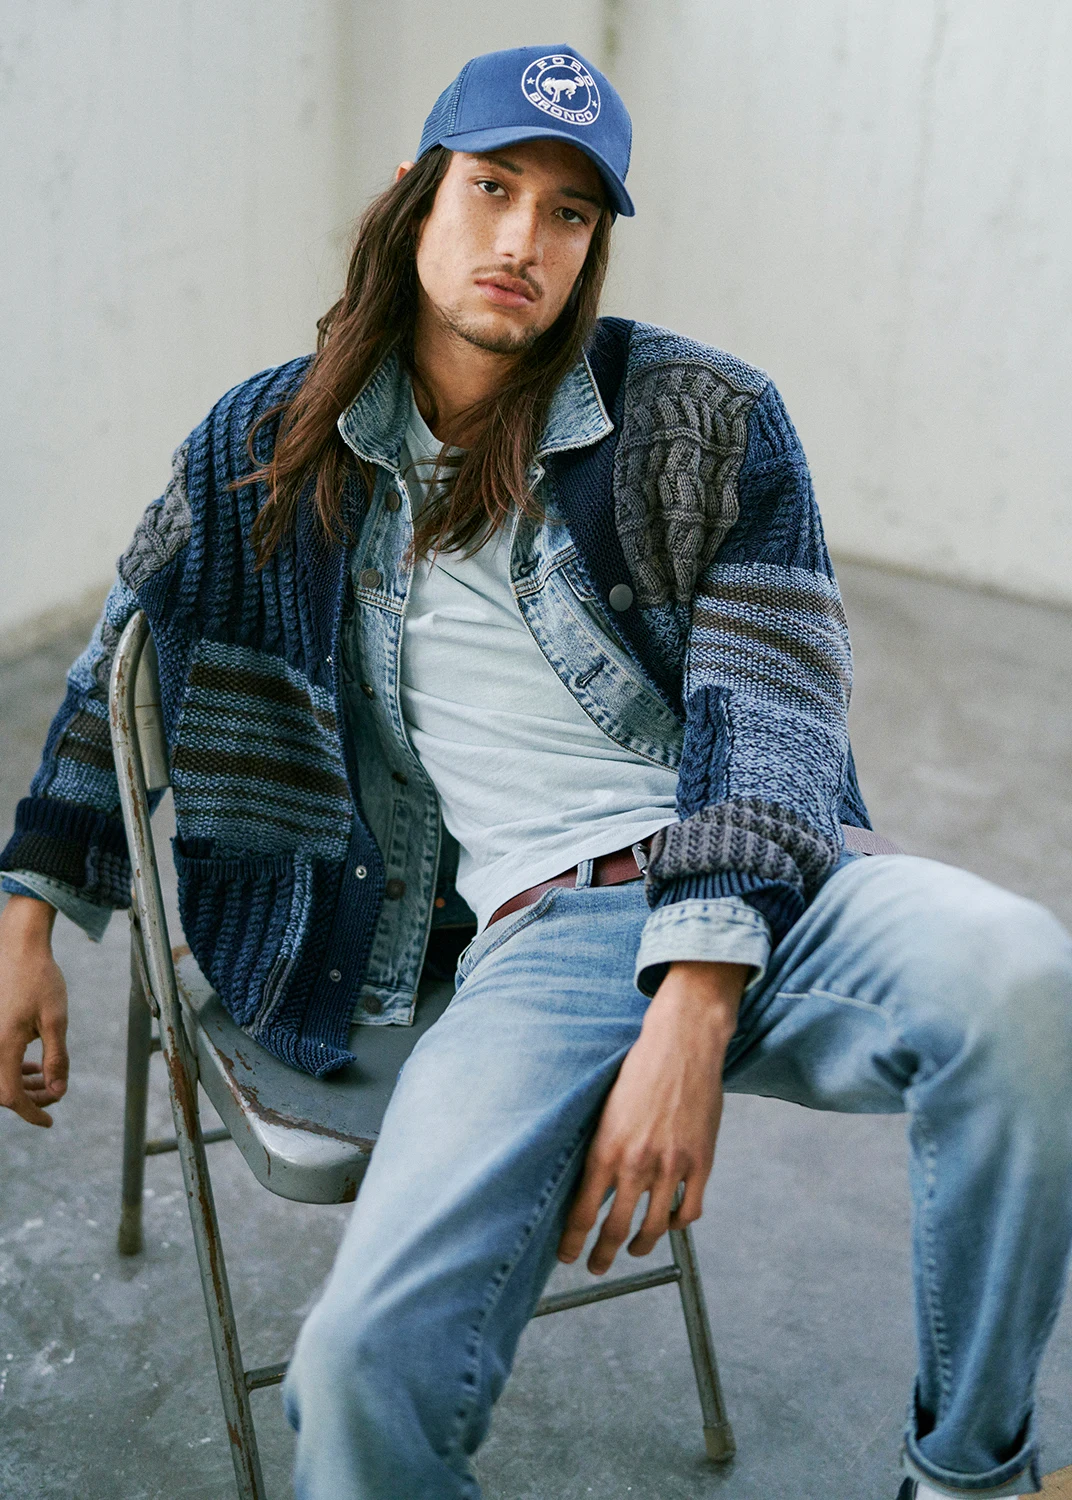 Barbato Collective, BarbatoCo, Daniel Barbato, RJ Shaughnessy, Creative, Creative Direction, Art Direction, Lifestyle, Brand, Lucky Jeans, Lucky Brand, Editorial Photoshoot, California, Los Angeles, LA, Cali, Studio, Fashion, Style, America, USA, Denim, Denim Style, Denim Campaign, Jeans, Warehouse, Branding, Optimistic, Optimism, Friends, Relaxed, Casual, Classic, Iconic, Timeless, Indigo, Portraits, Spring, Summer, Happy, Joy, Fit for You, Size, Diversity, Denim Fits, Menswear, Group